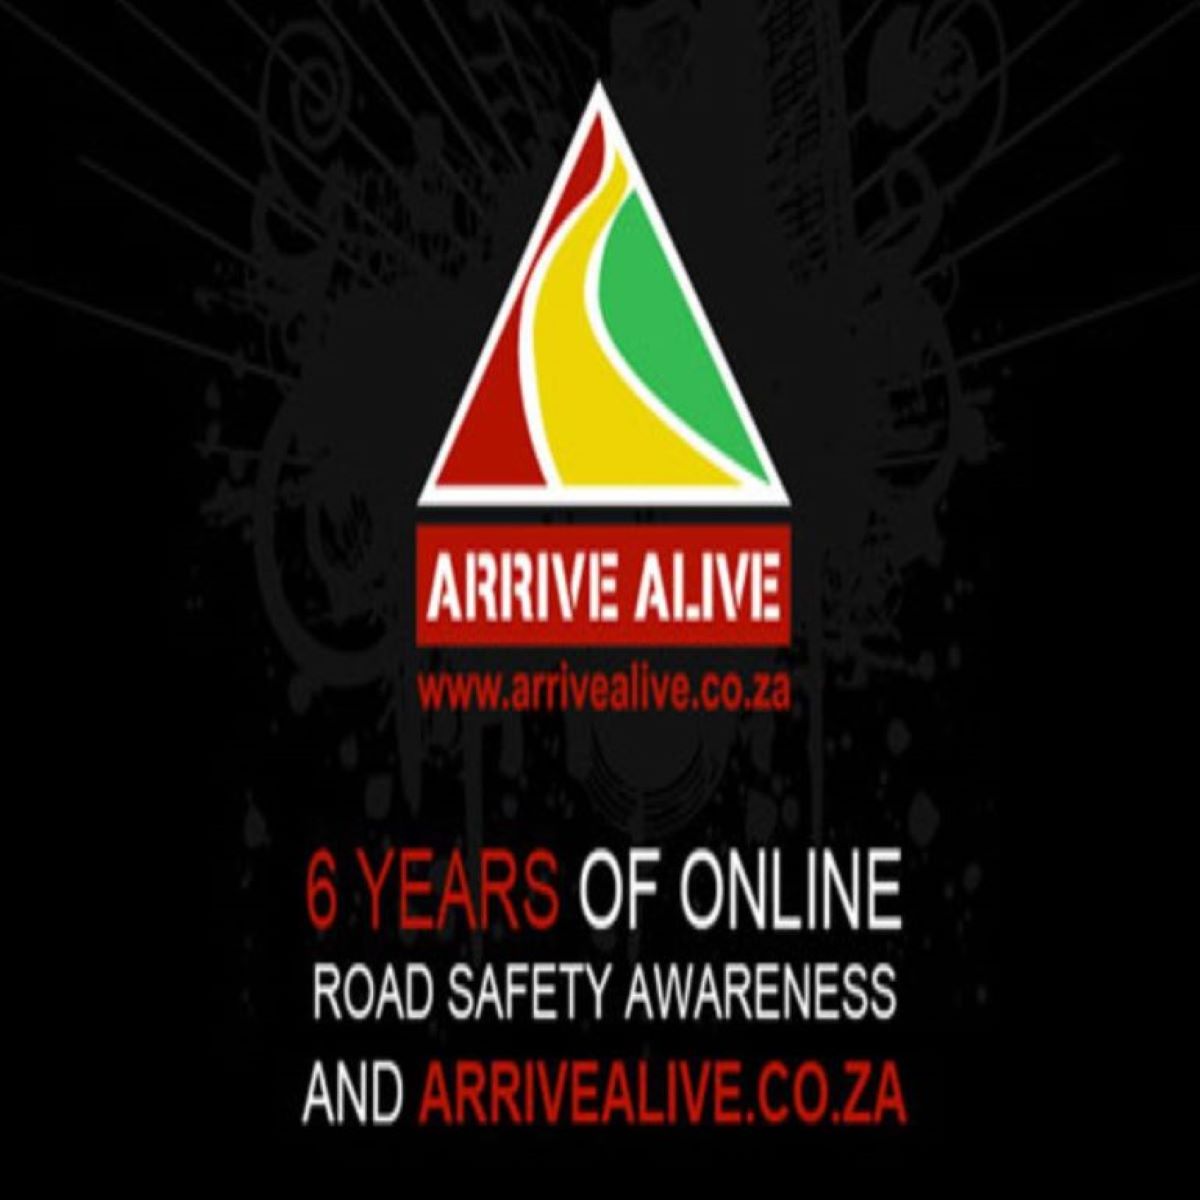 Road Safety and Preventing Smash-and-Grab - Arrive Alive